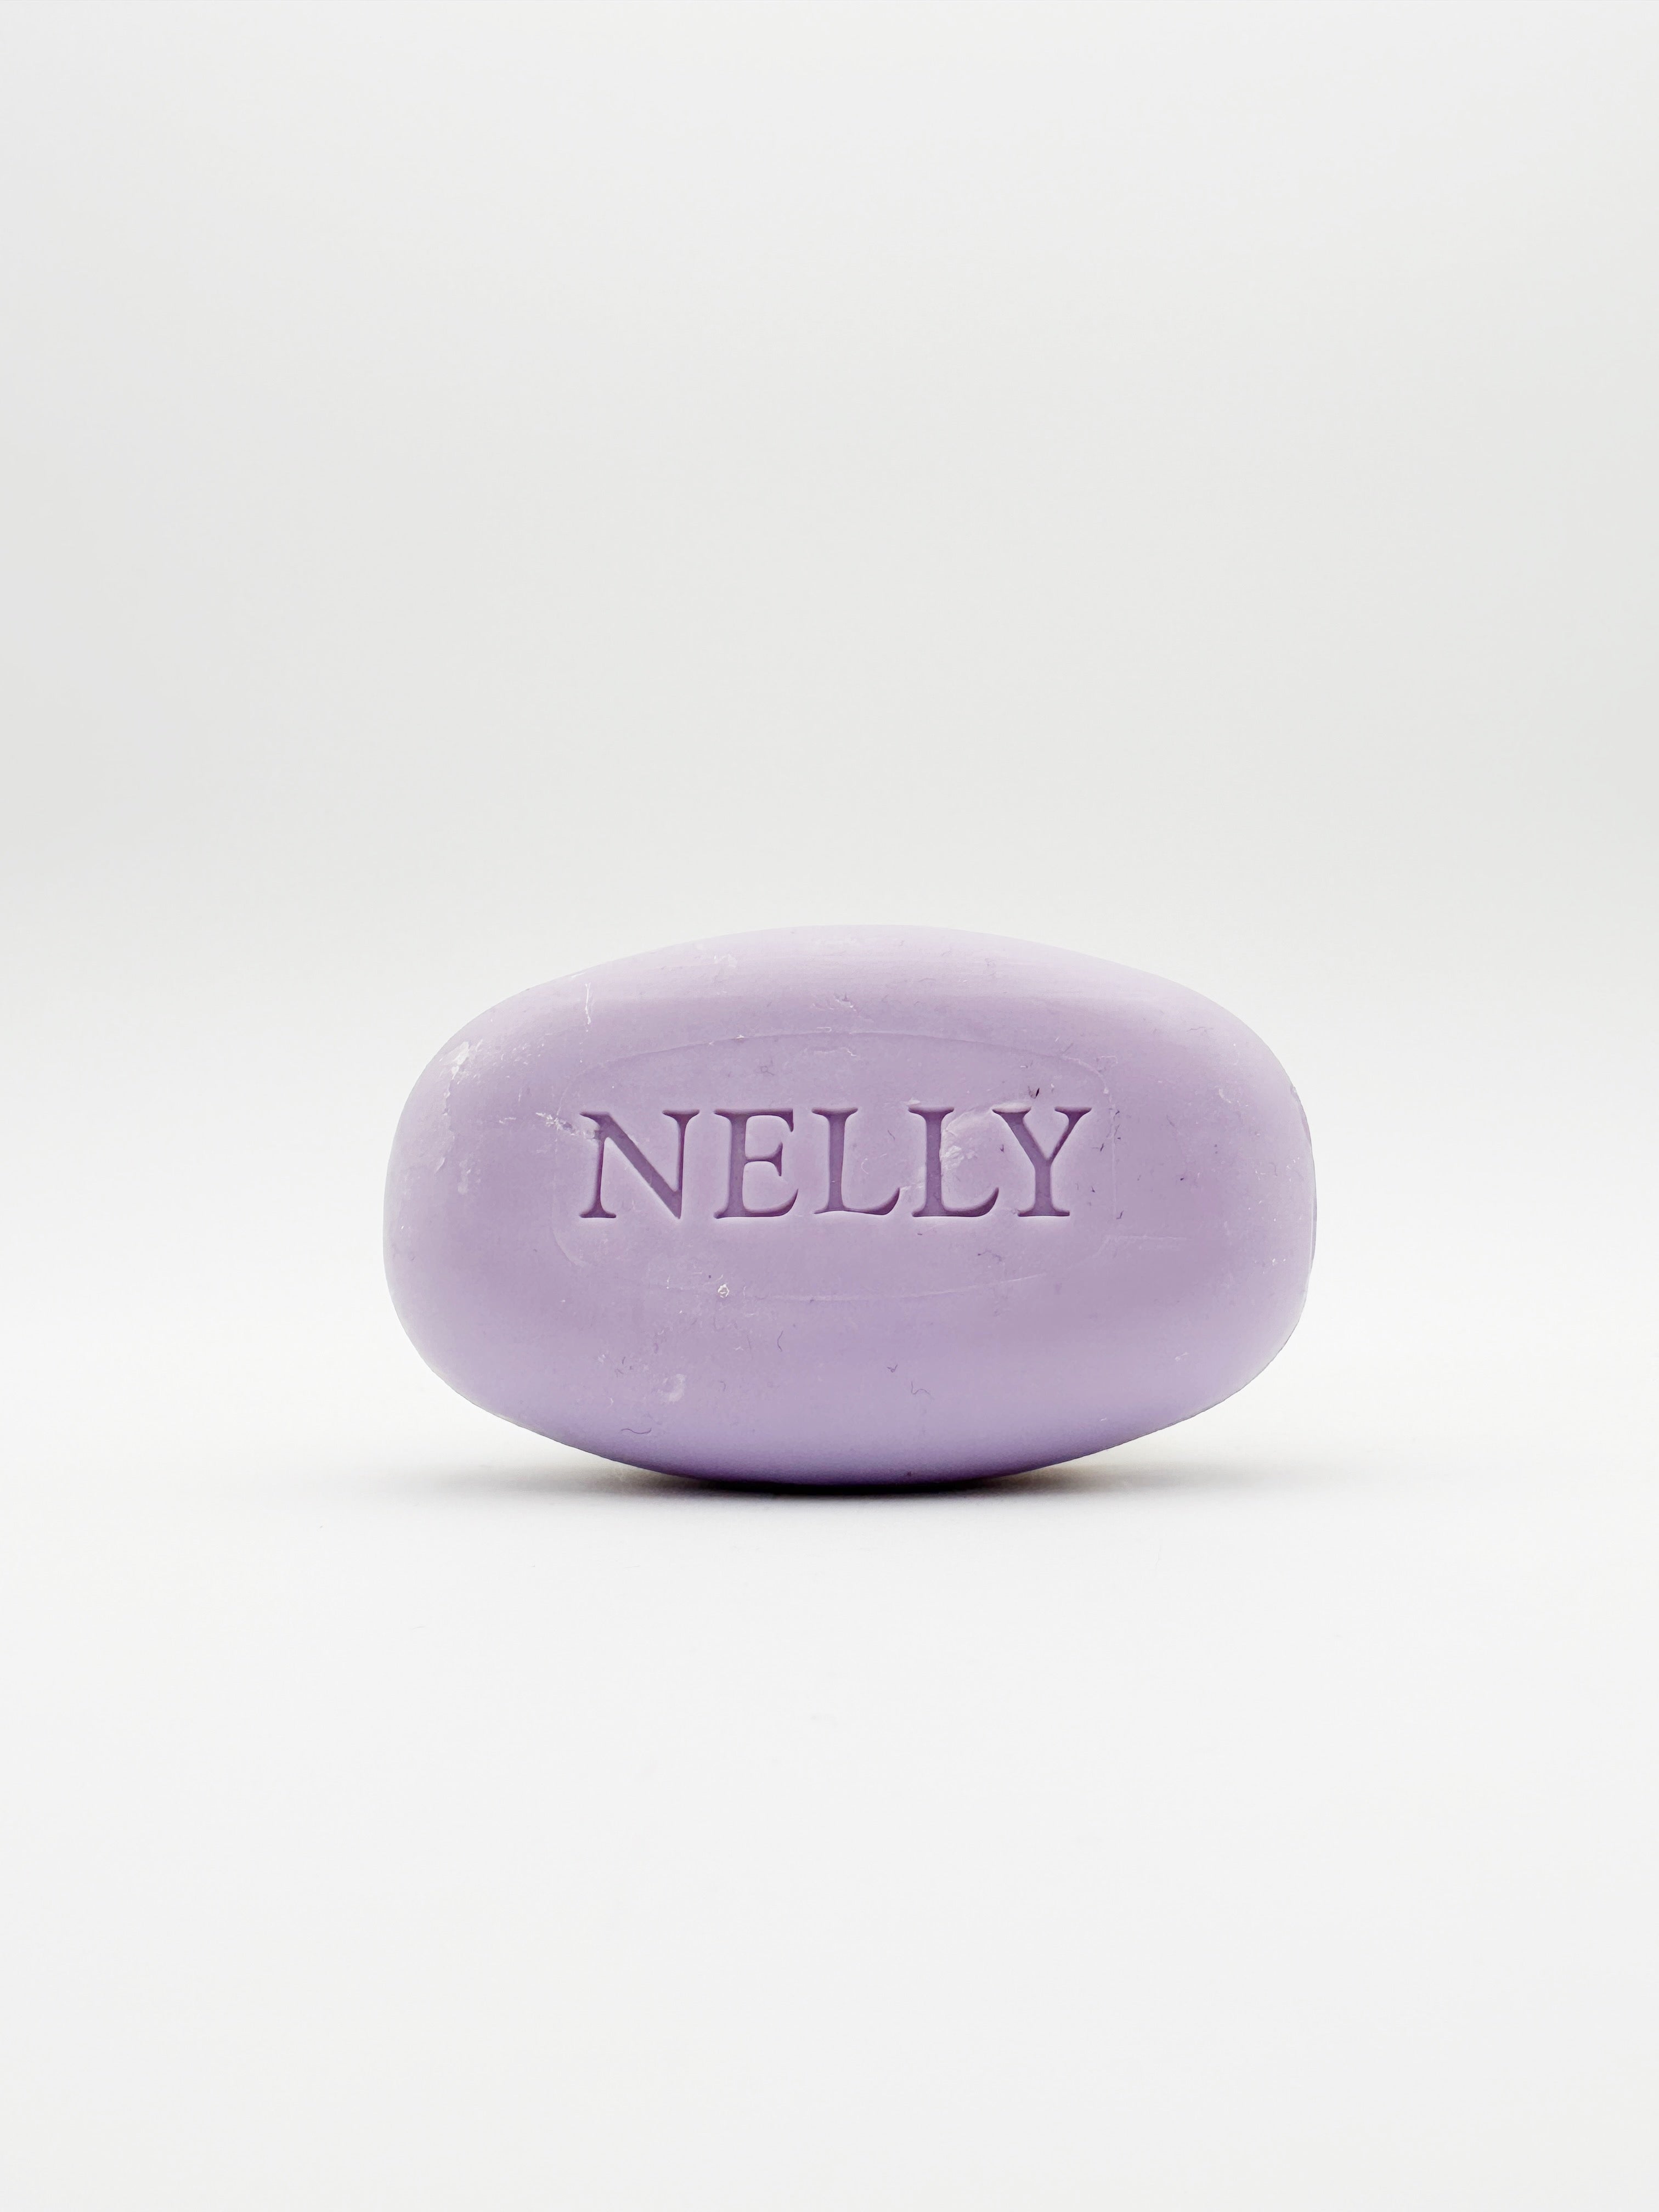 Nelly Seife lose 100g